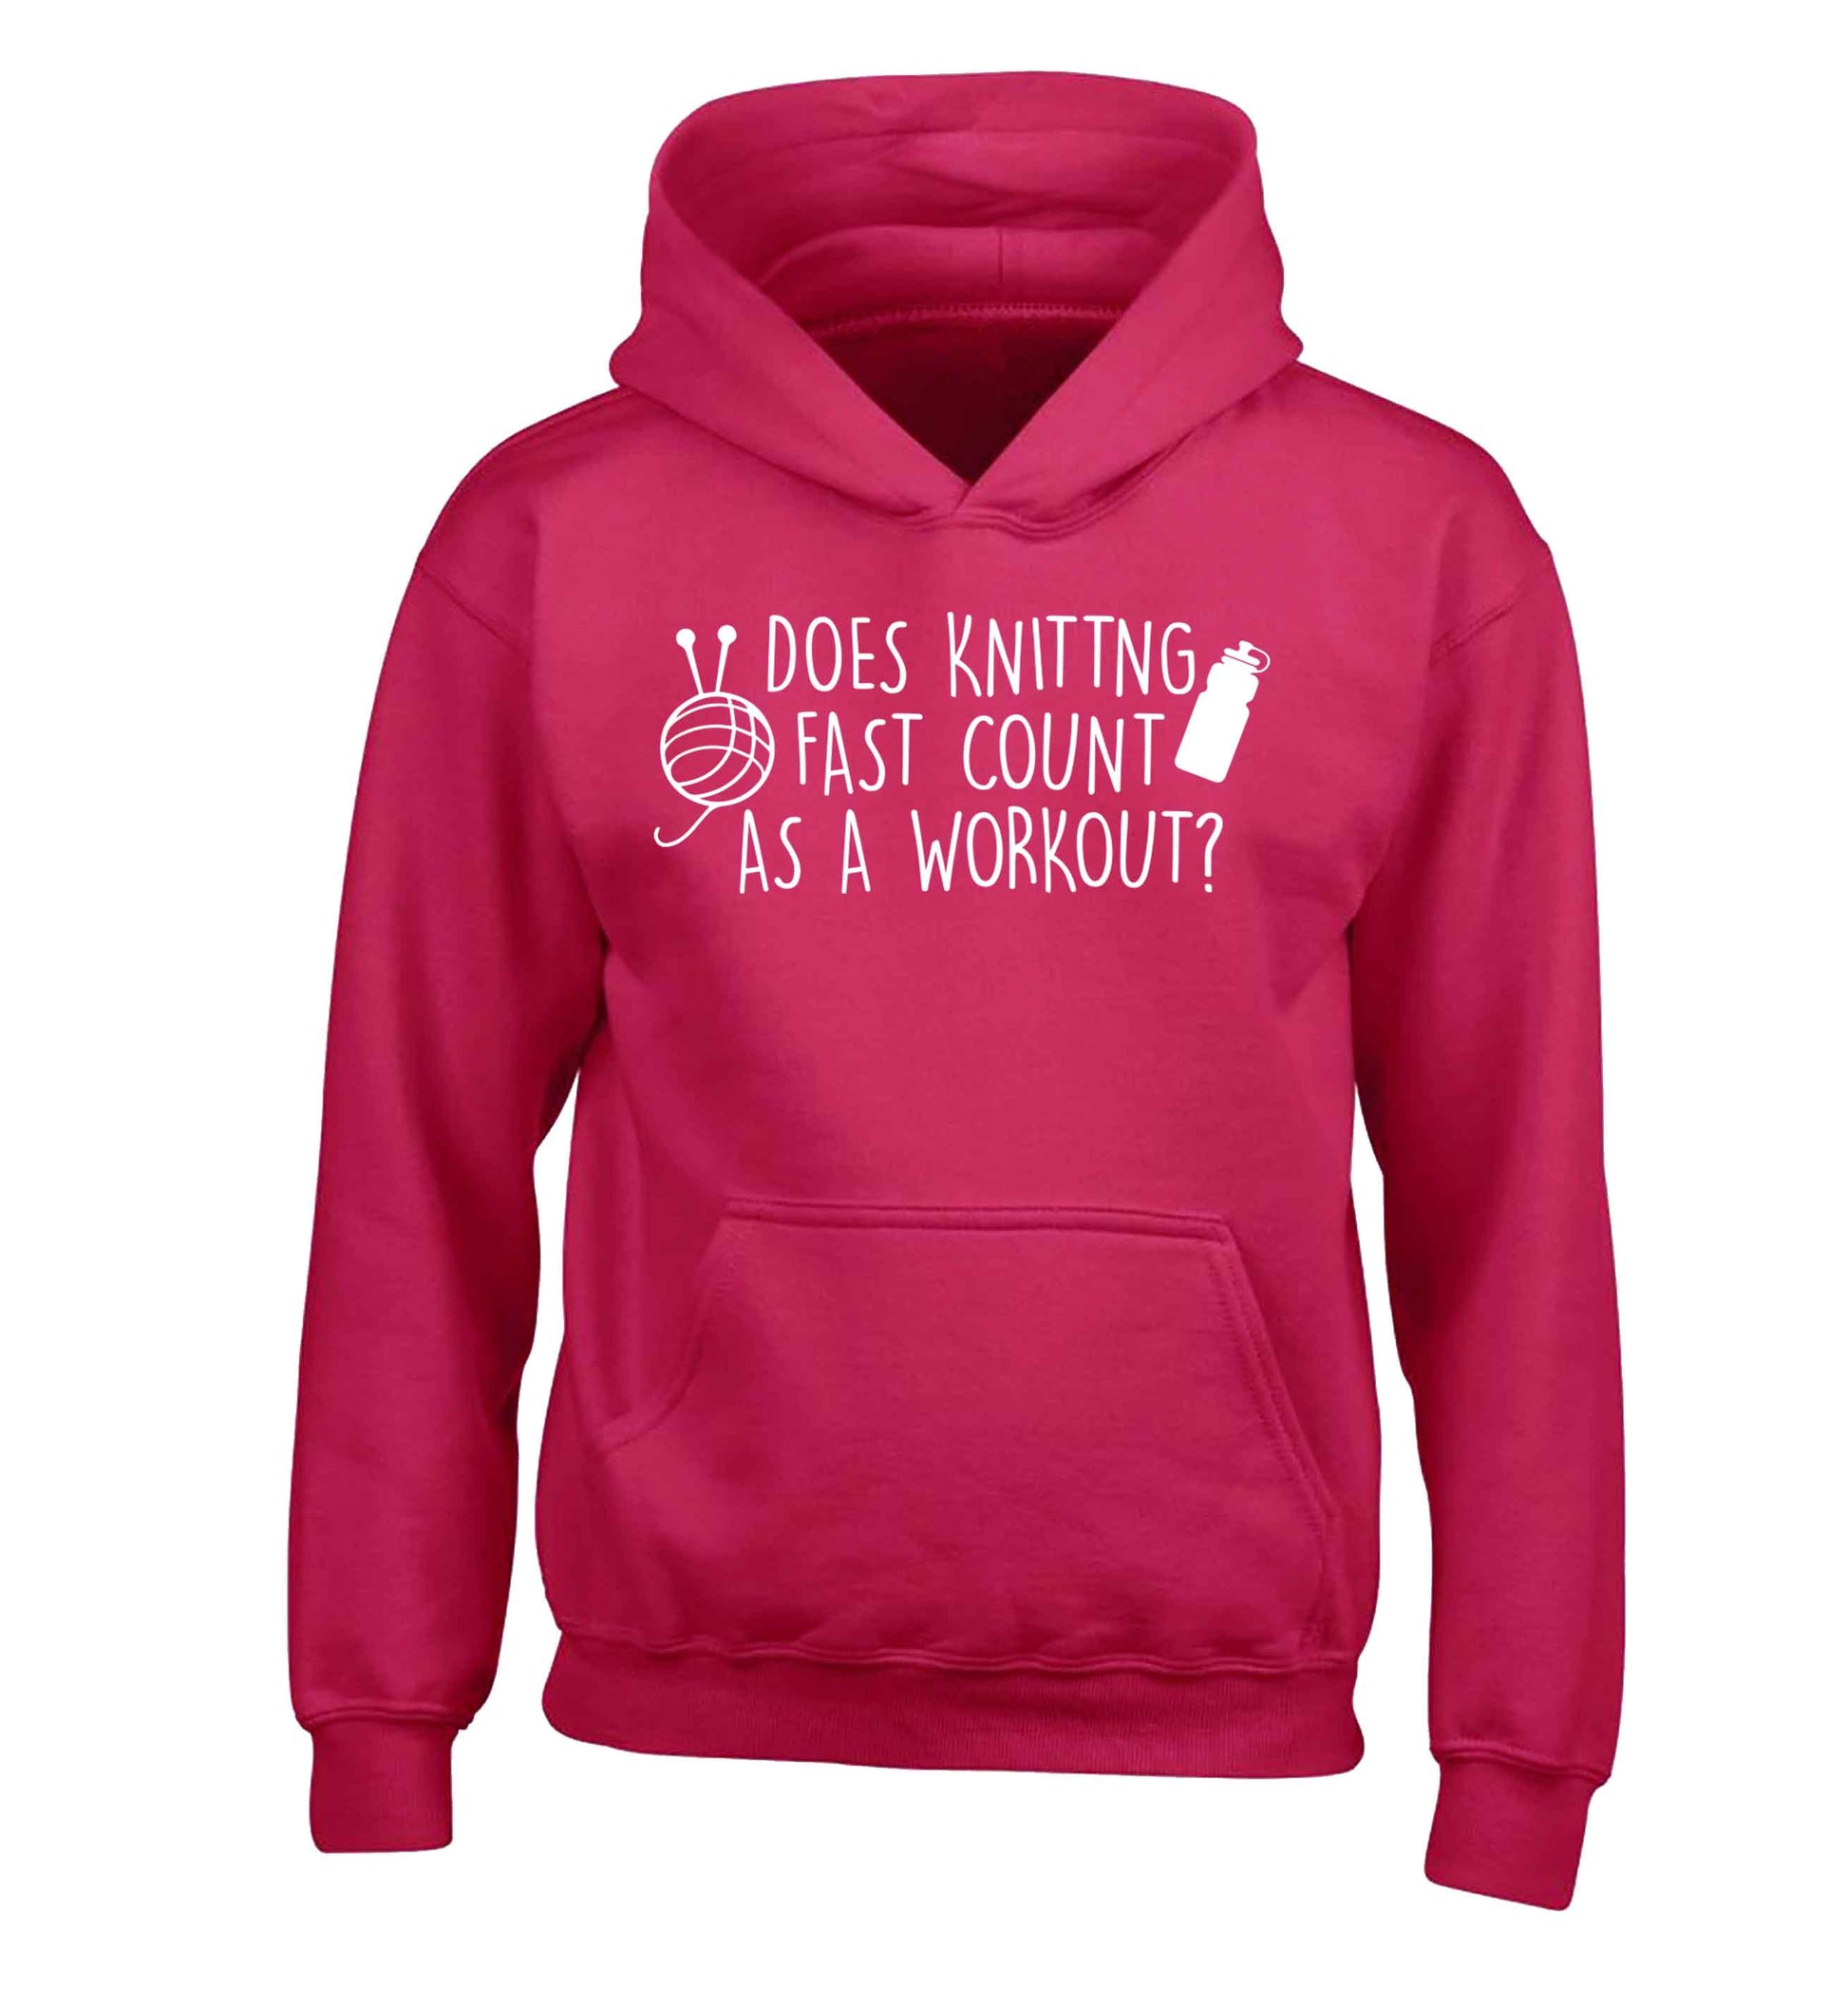 Does knitting fast count as a workout? children's pink hoodie 12-13 Years